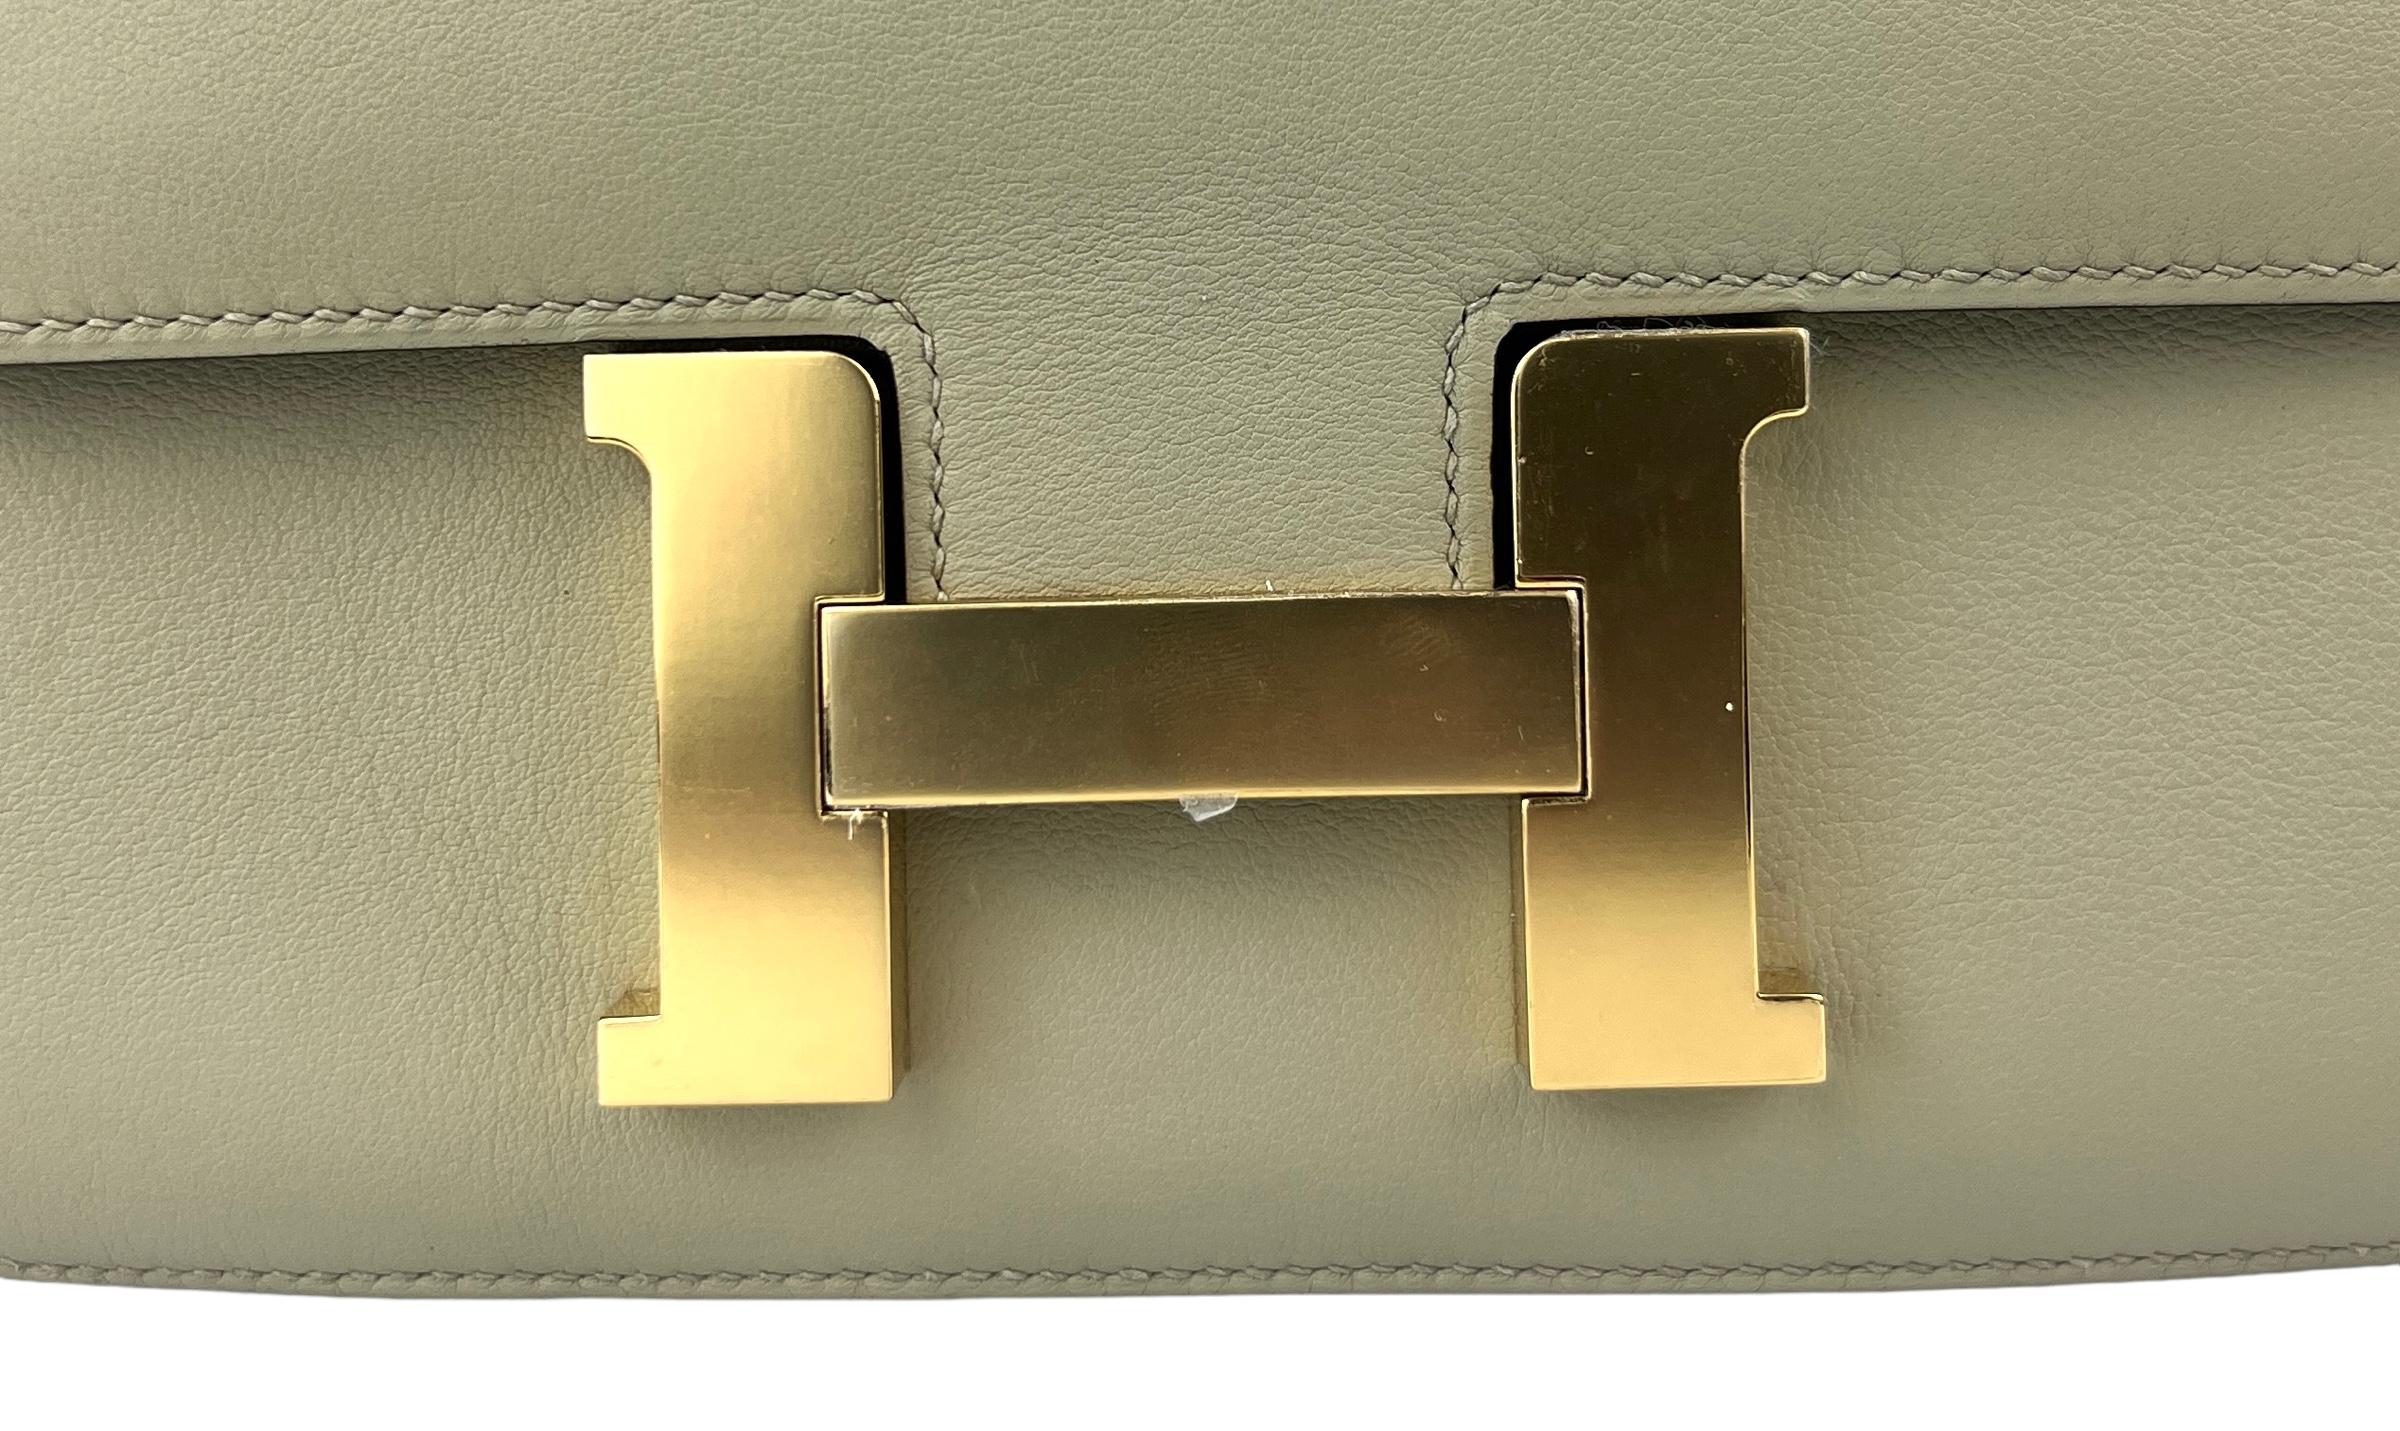 Absolutely Stunning Ultra Rare Hermes Constance 24 Sauge Swift Leather Palladium Hardware. As new 2016 X Stamp.

Shop with Confidence from Lux Addicts. Authenticity Guaranteed! 
